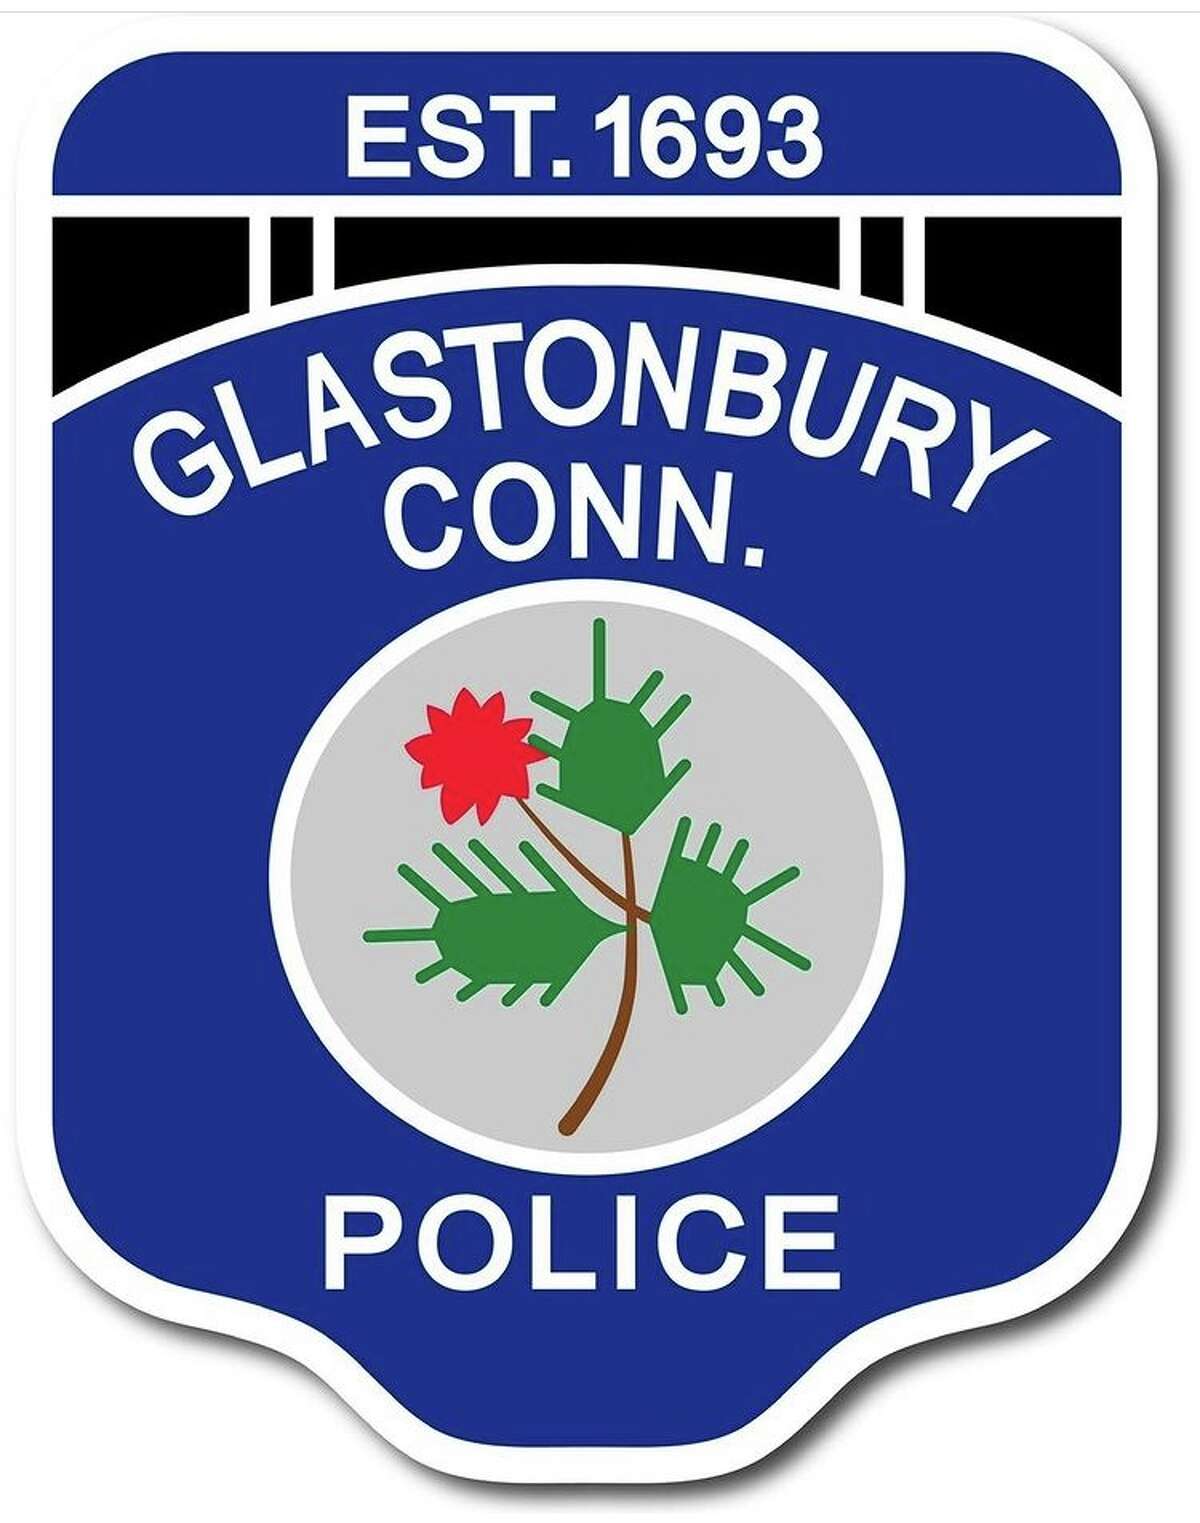 Glastonbury police say they are investigating a series of incidents during which objects were “launched” at cars in recent months.